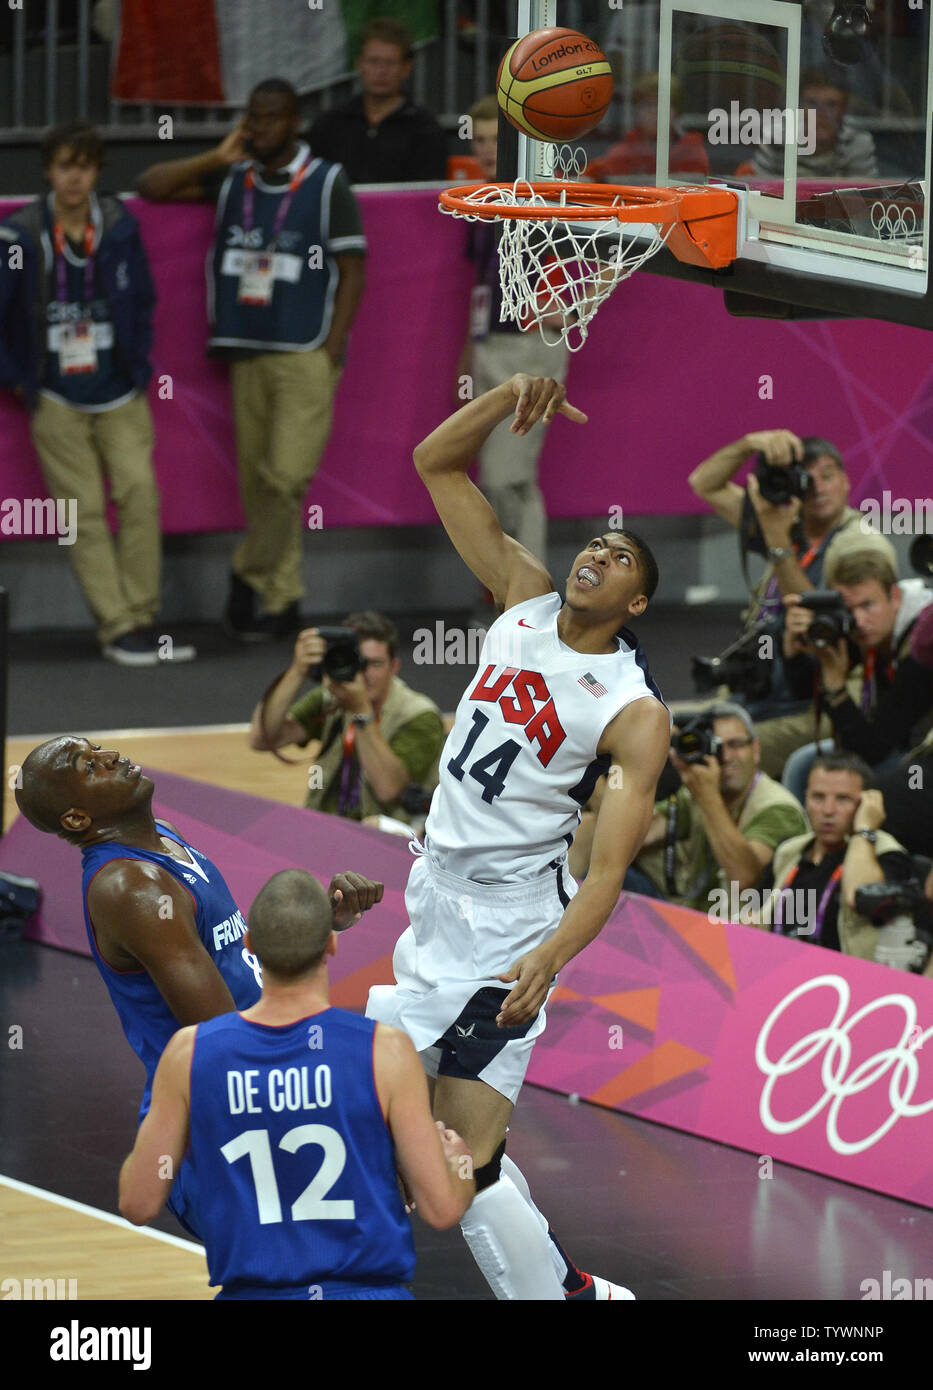 United States' Anthony Davis, who also plays for the NBA's New Orleans Hornets, goes for a rebound against France's Nando de Colo (12) and Ali Traore during the United States-France Men's Basketball Preliminary competition at the 2012 Summer Olympics, July 29, 2012, in London, England.              UPI/Mike Theiler Stock Photo